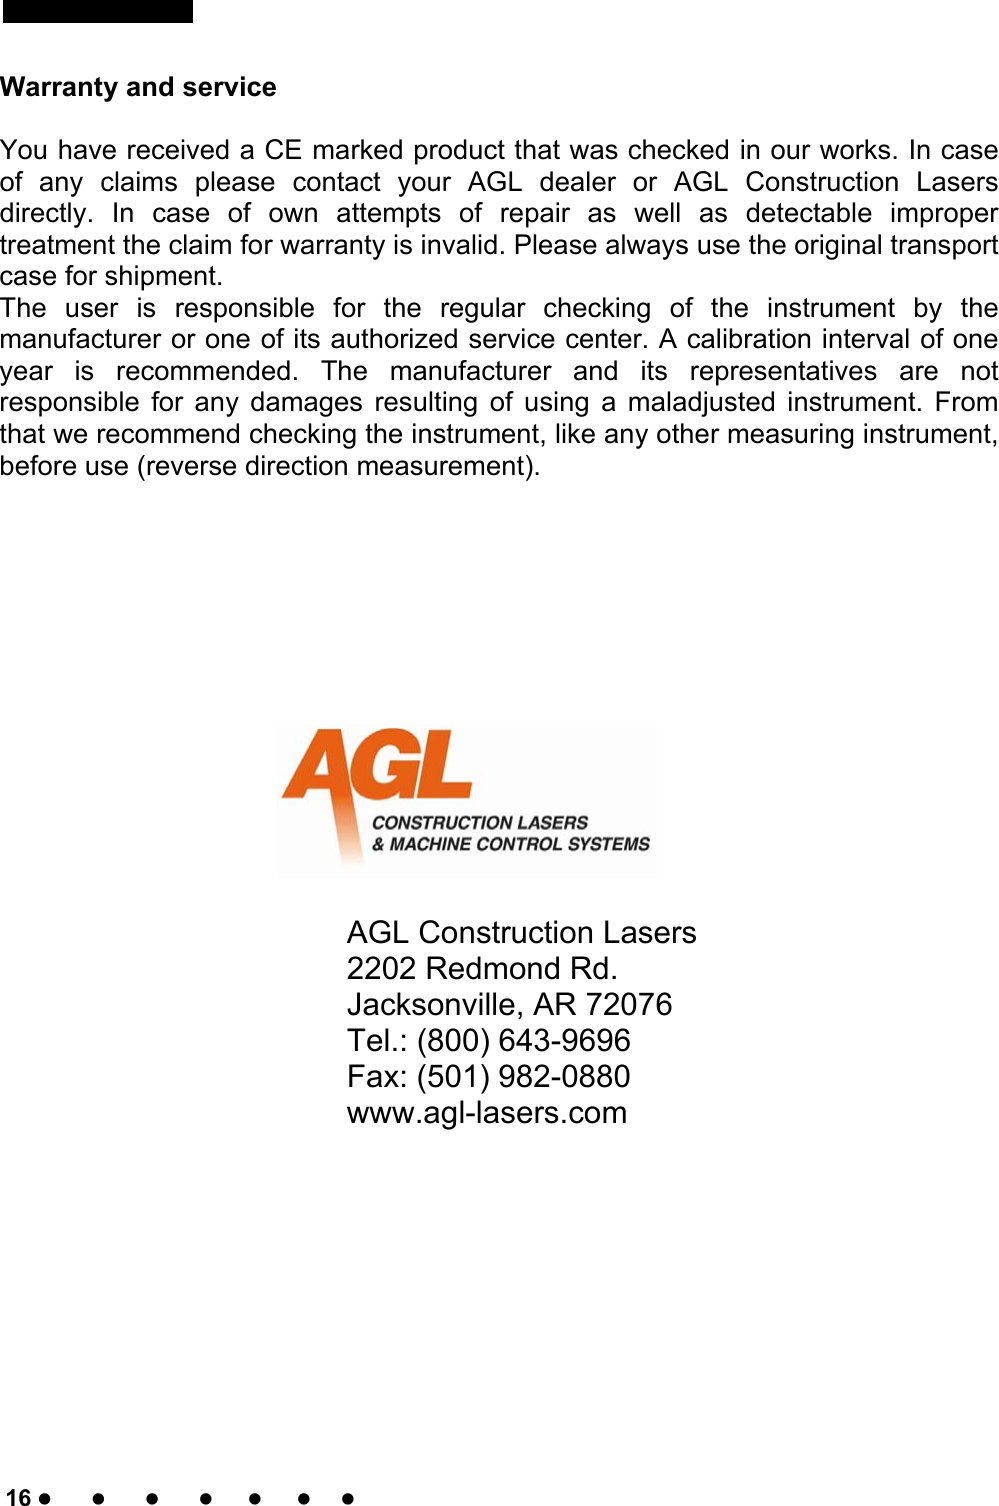      16                                                                                                                                         Warranty and service  You have received a CE marked product that was checked in our works. In case of any claims please contact your AGL dealer or AGL Construction Lasers directly. In case of own attempts of repair as well as detectable improper treatment the claim for warranty is invalid. Please always use the original transport case for shipment. The user is responsible for the regular checking of the instrument by the manufacturer or one of its authorized service center. A calibration interval of one year is recommended. The manufacturer and its representatives are not responsible for any damages resulting of using a maladjusted instrument. From that we recommend checking the instrument, like any other measuring instrument, before use (reverse direction measurement).                                                 AGL Construction Lasers  2202 Redmond Rd.       Jacksonville, AR 72076      Tel.: (800) 643-9696      Fax: (501) 982-0880      www.agl-lasers.com   